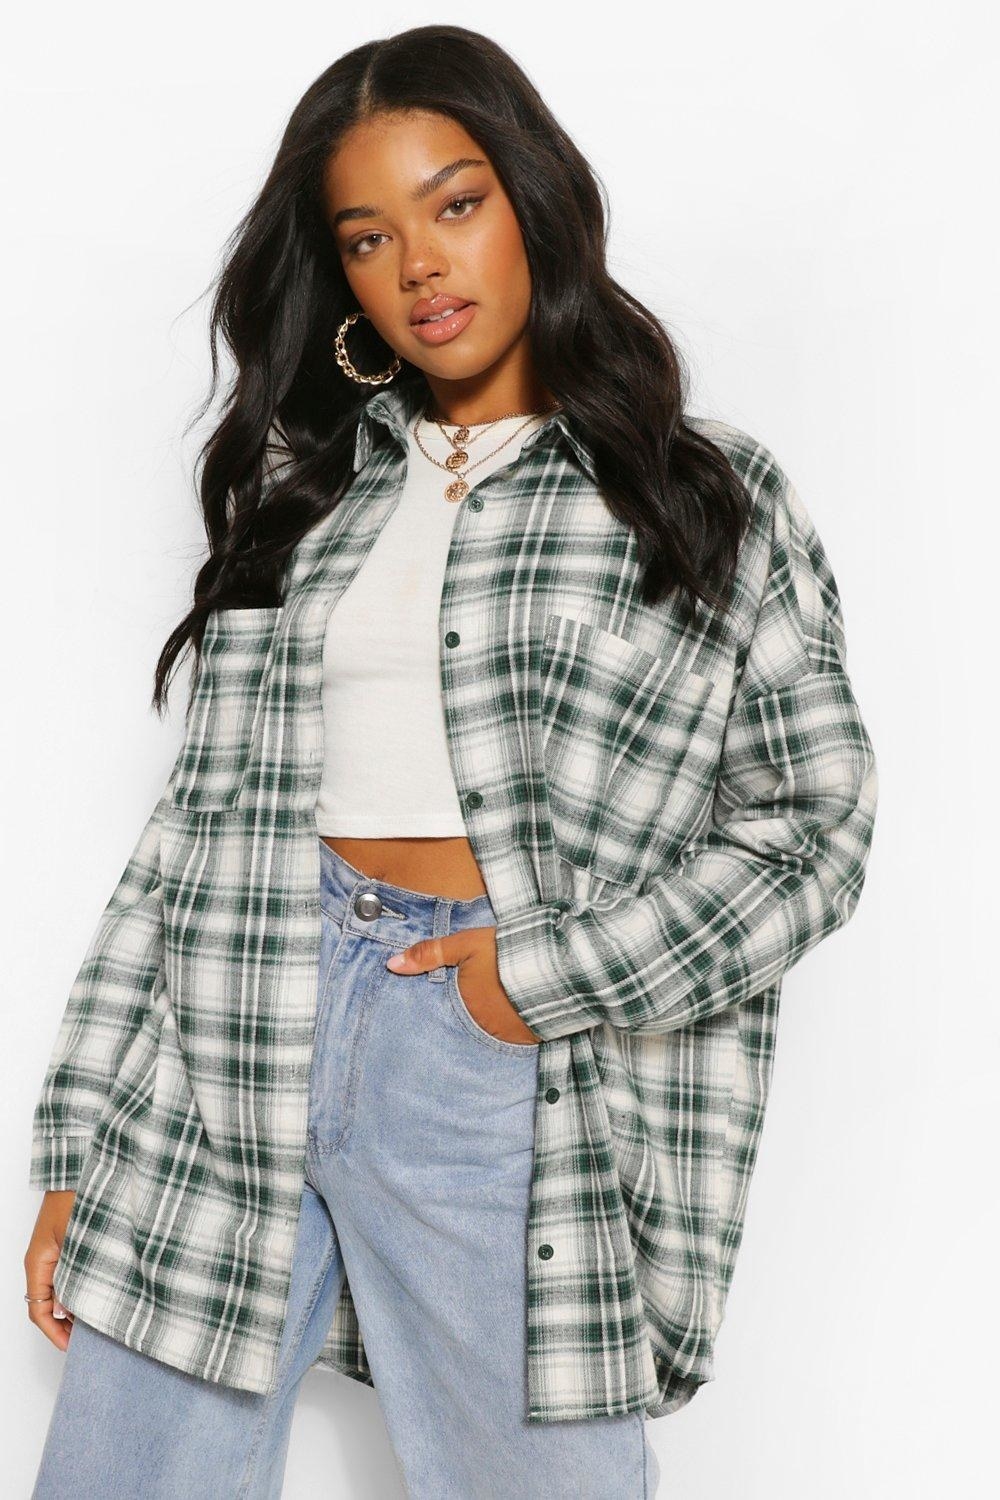 a model in an oversized green and white flannel